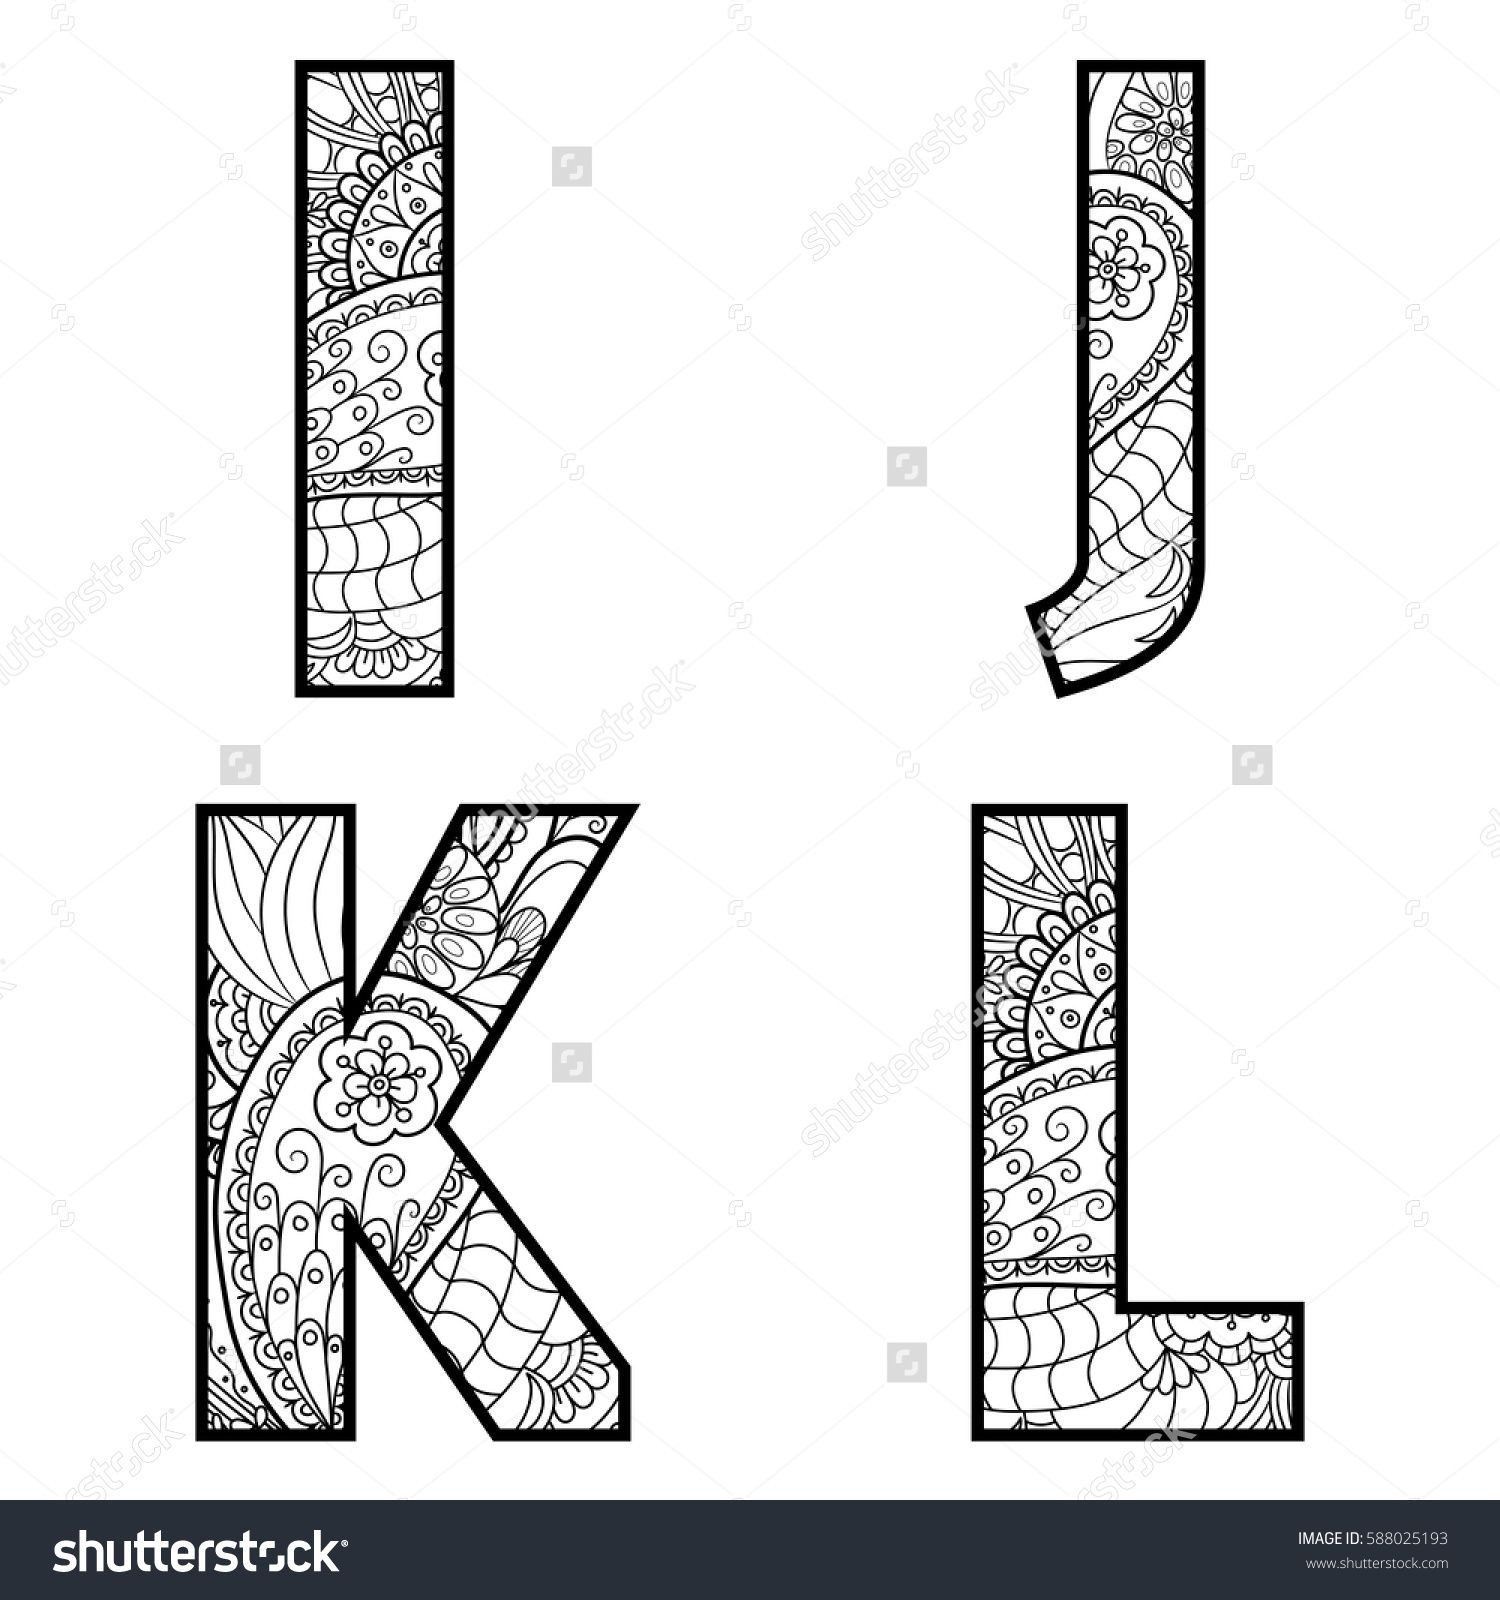 Embroidery Alphabet Patterns Patterns For Alphabet Letters Fresh Letter Embroidery Templates New